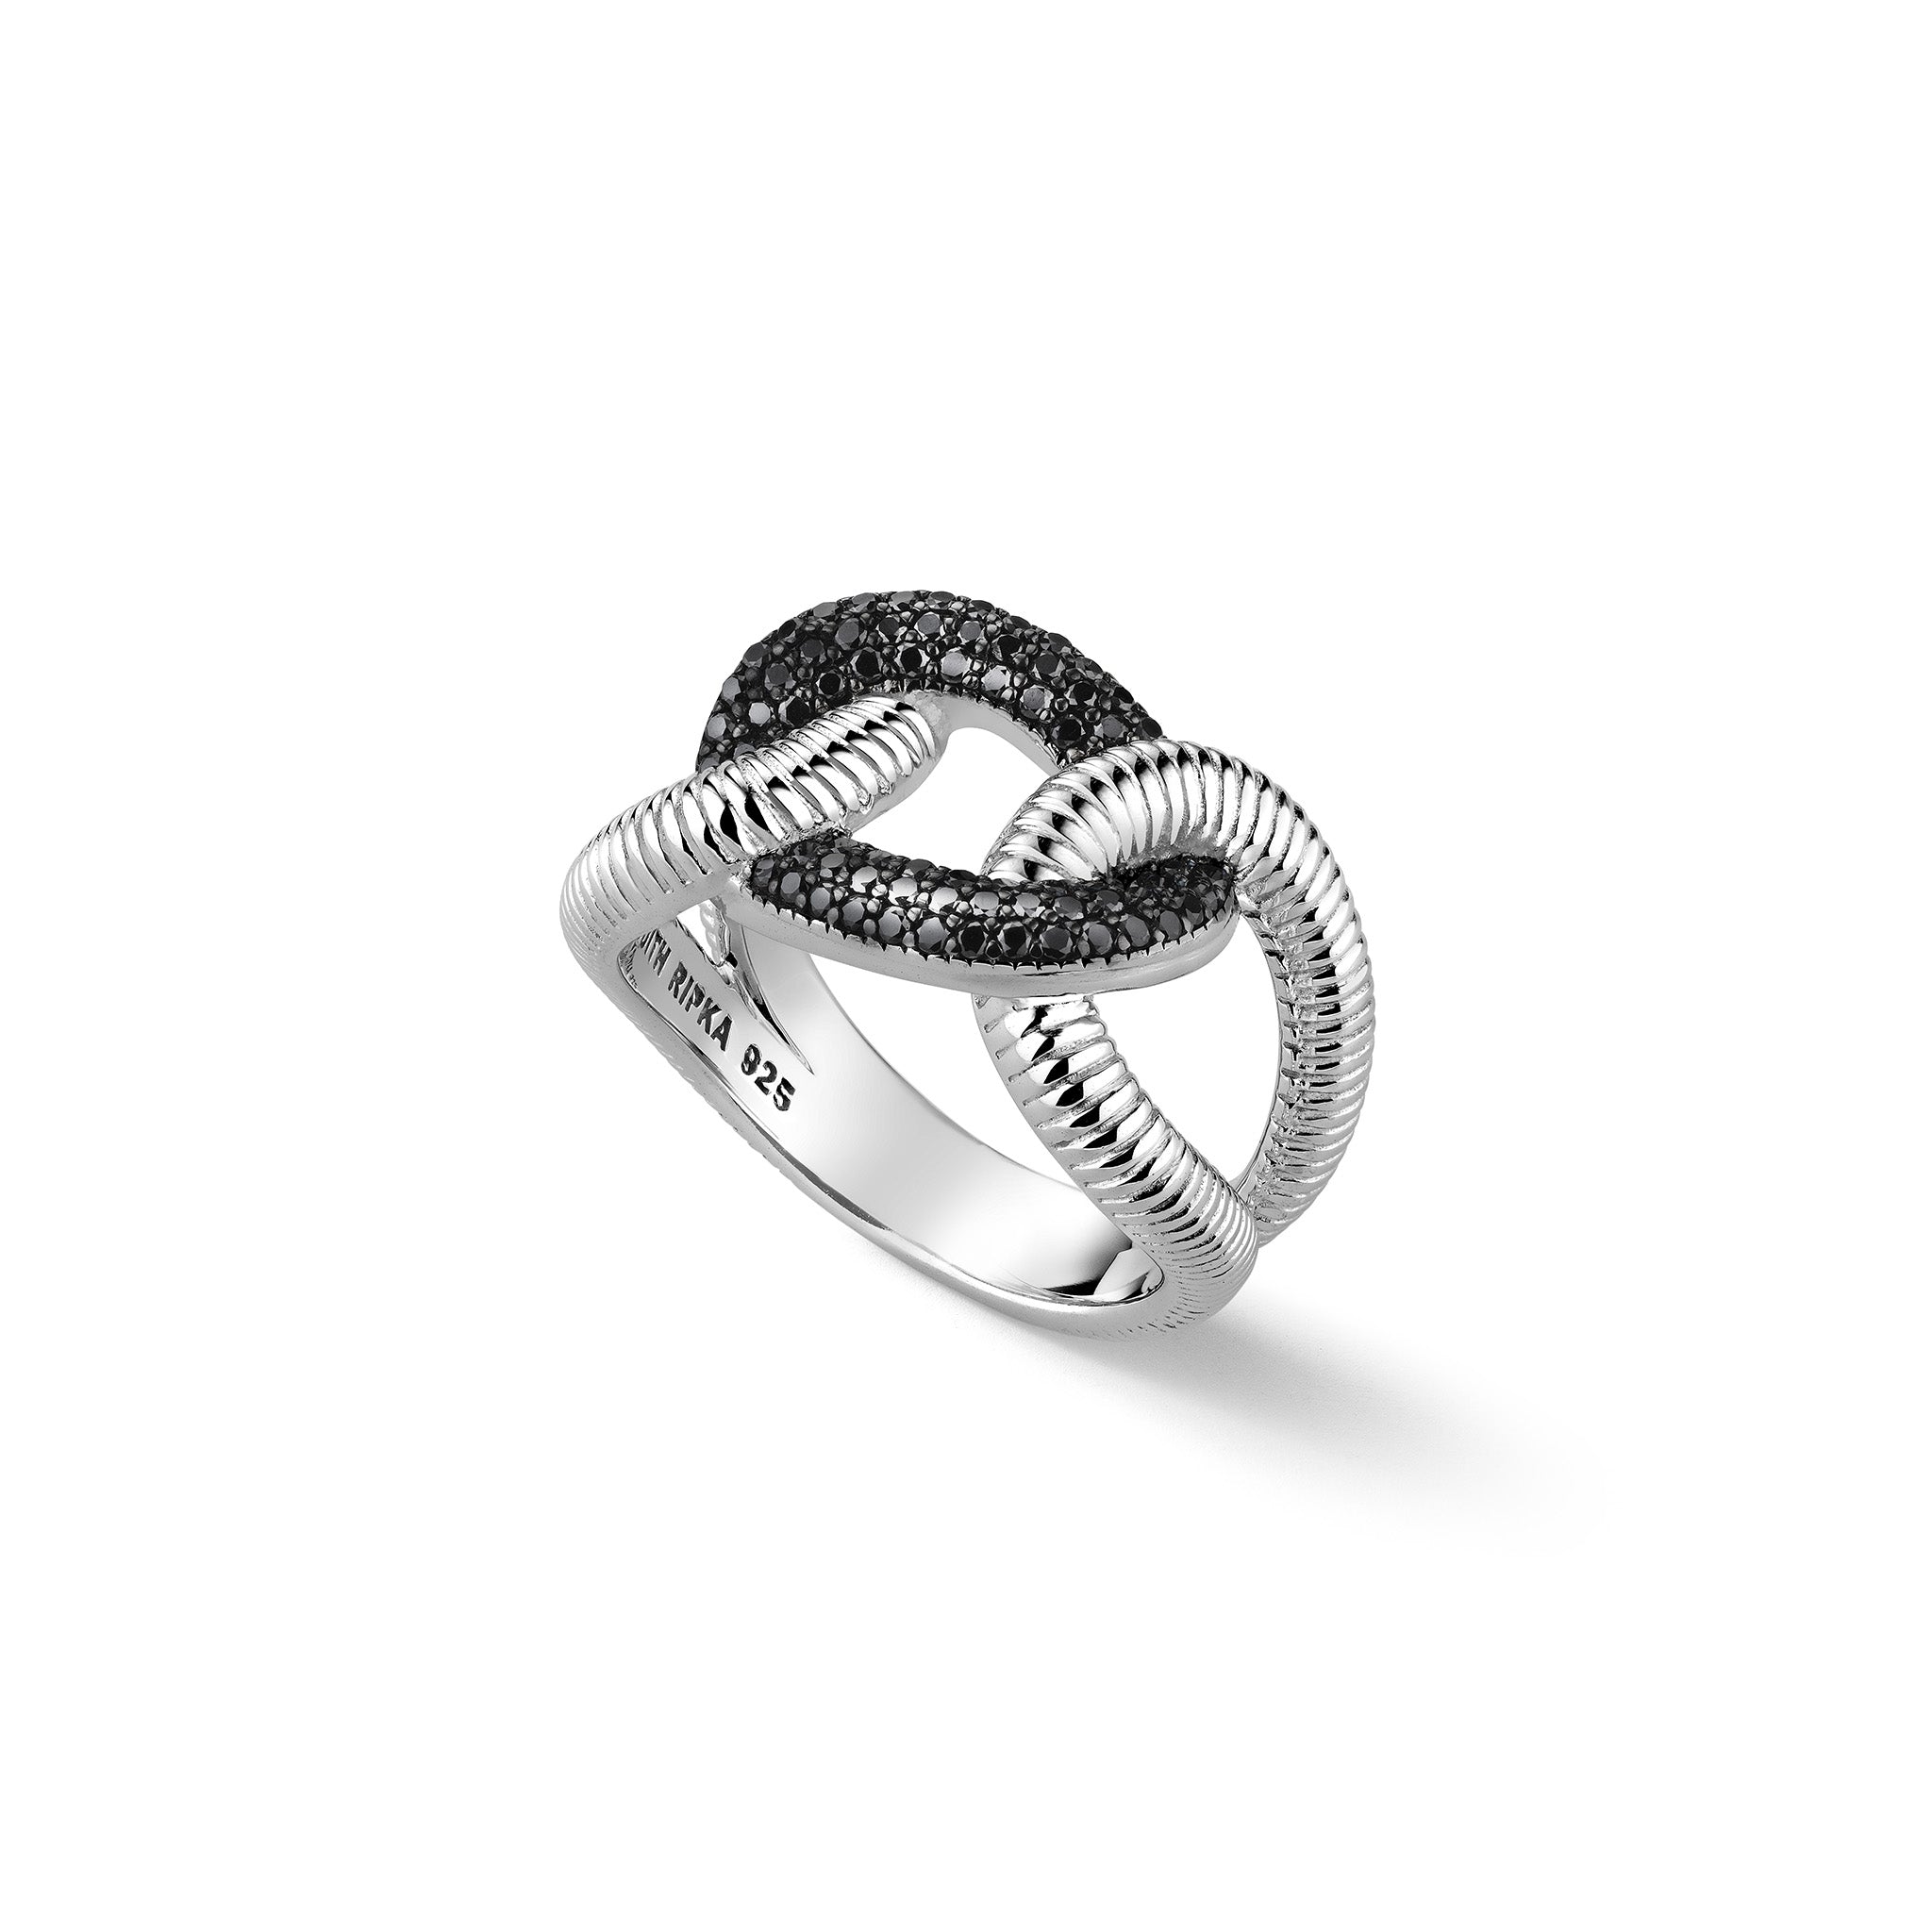 Eternity Interlocking Link Ring with Black Spinel